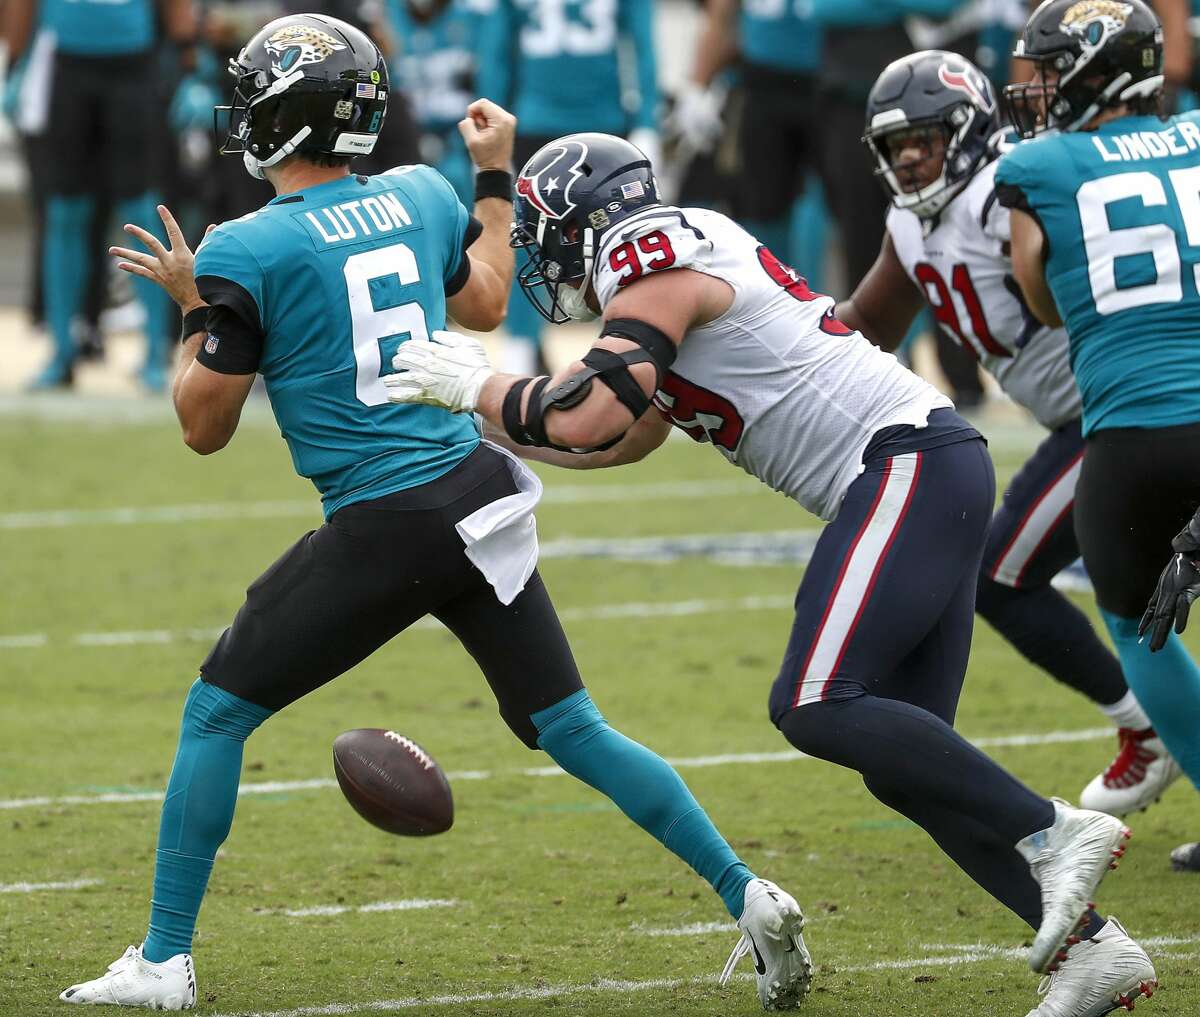 Houston Texans defensive end J.J. Watt (99) strips the ball away from Jacksonville Jaguars quarterback Jake Luton (6) as he sacks the quarterback during the second half of an NFL football game at TIAA Bank Field Sunday, Nov. 8, 2020, in Jacksonville. The sack was Watt's 100th career sack.